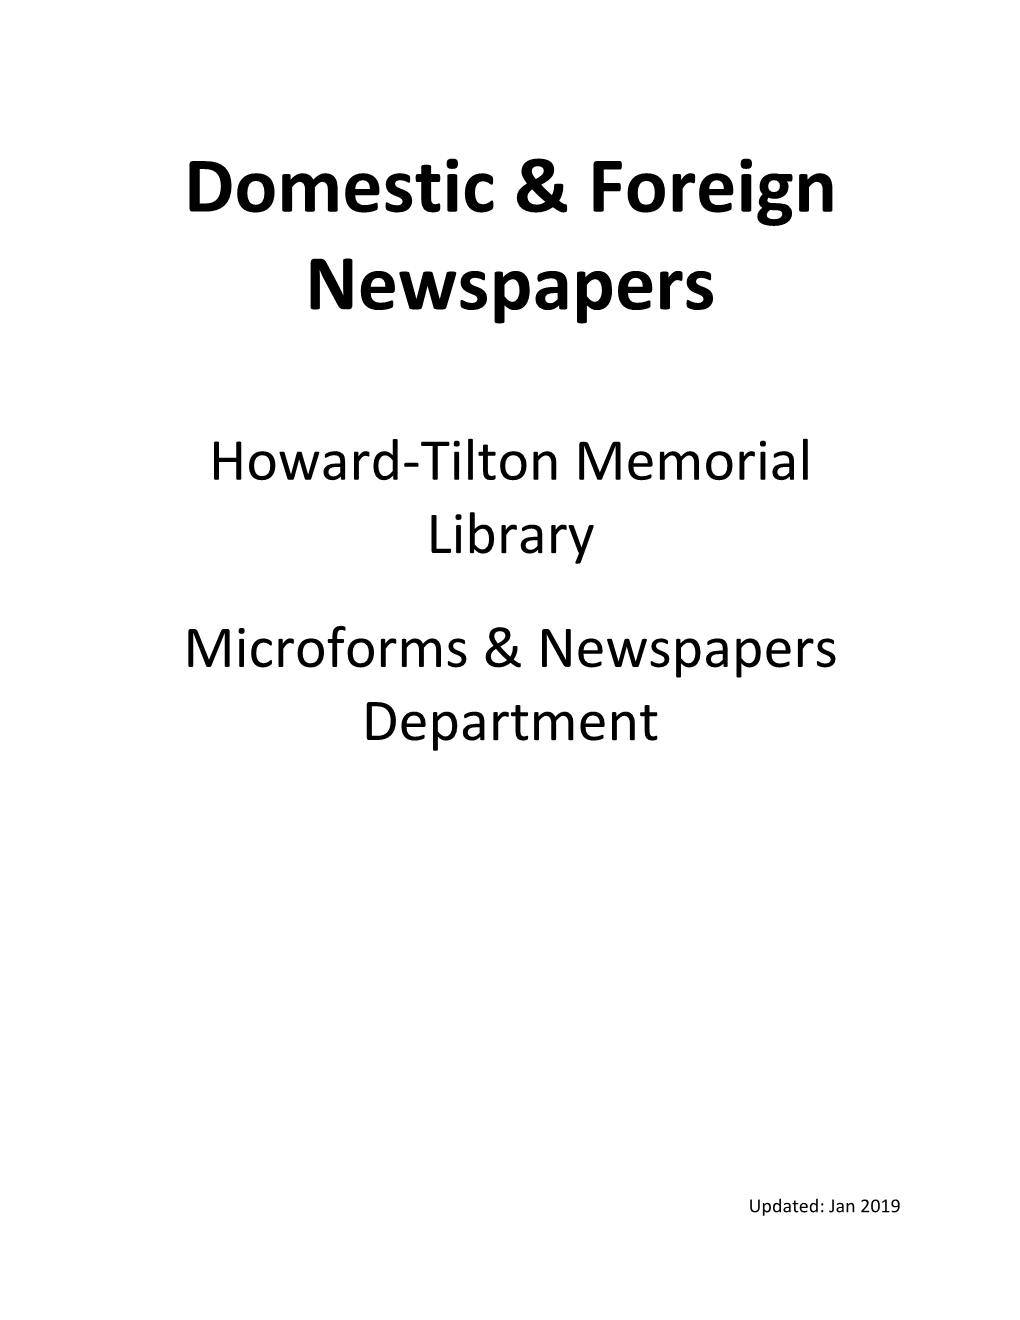 Domestic & Foreign Newspapers